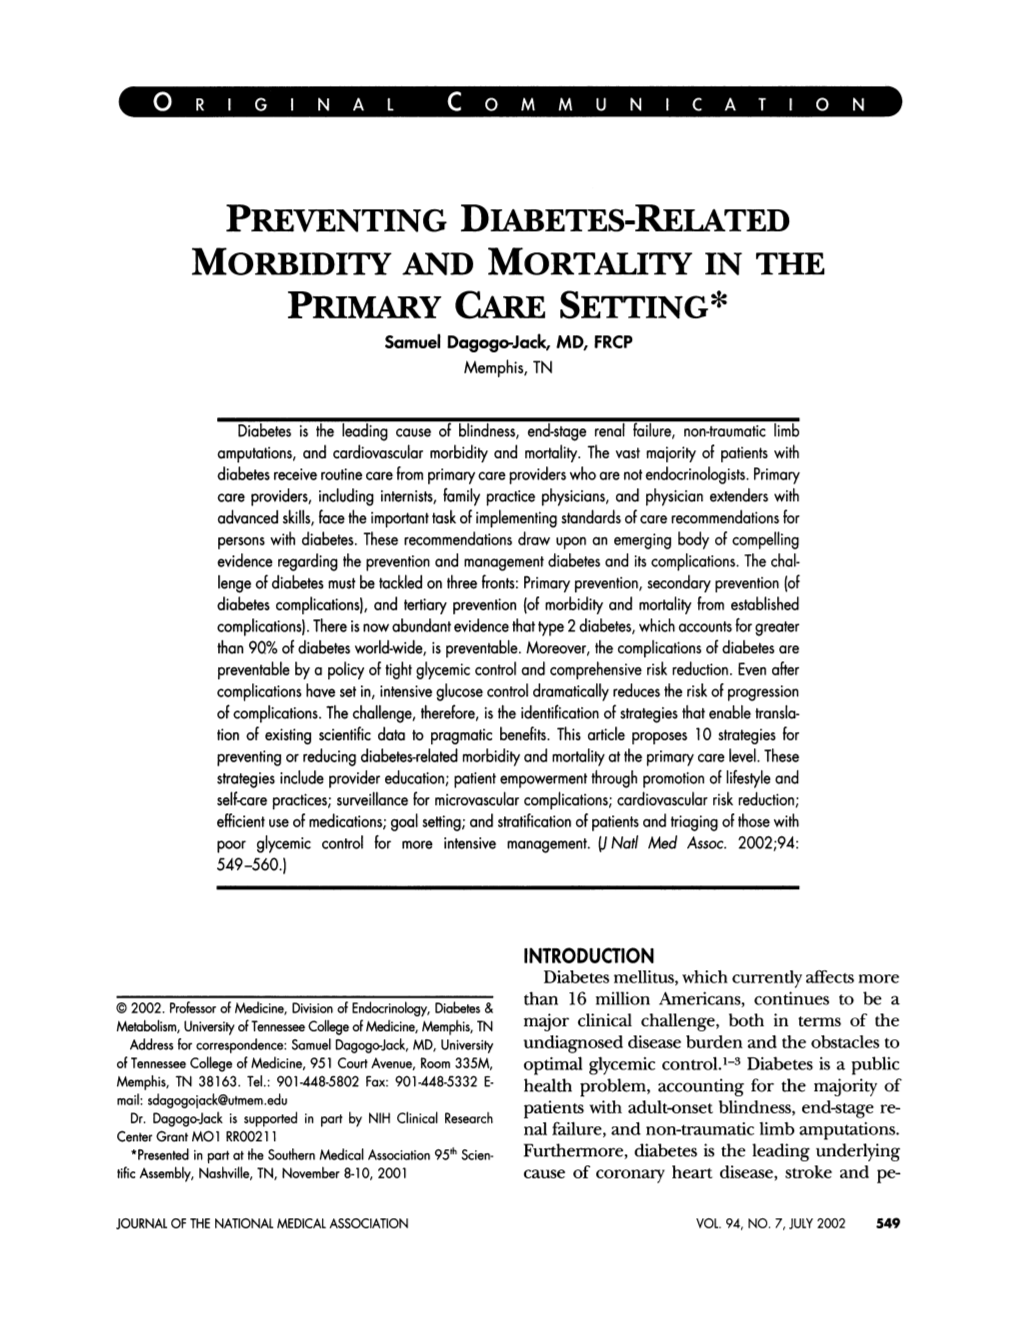 PREVENTING DIABETES-RELATED MORBIDITY and MORTALITY in the PRIMA1RY CARE SETTING* Samuel Dagogo-Jack, MD, FRCP Memphis, TN